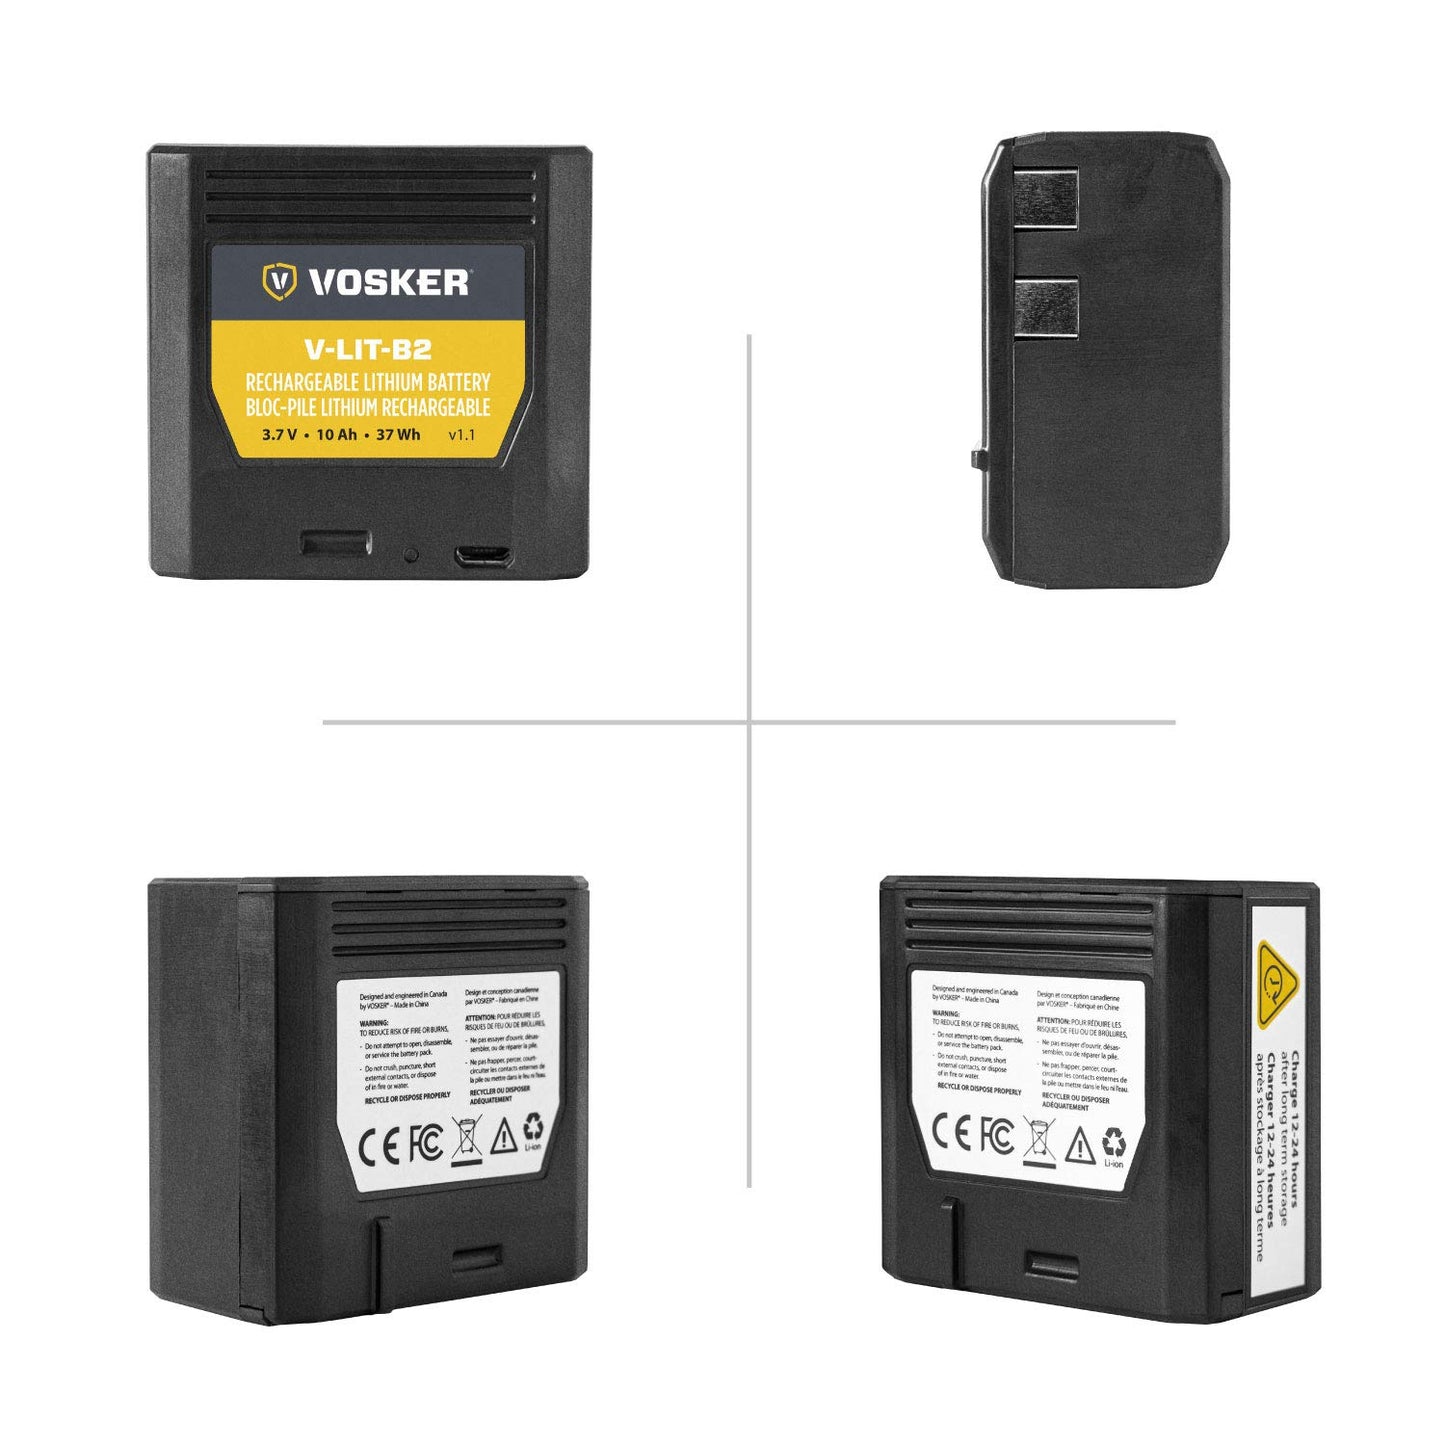 VOSKER Extra Rechargeable Lithium Battery Pack for V150 Mobile Security Camera - Long Lasting, Fast Charge, Weather Resistant